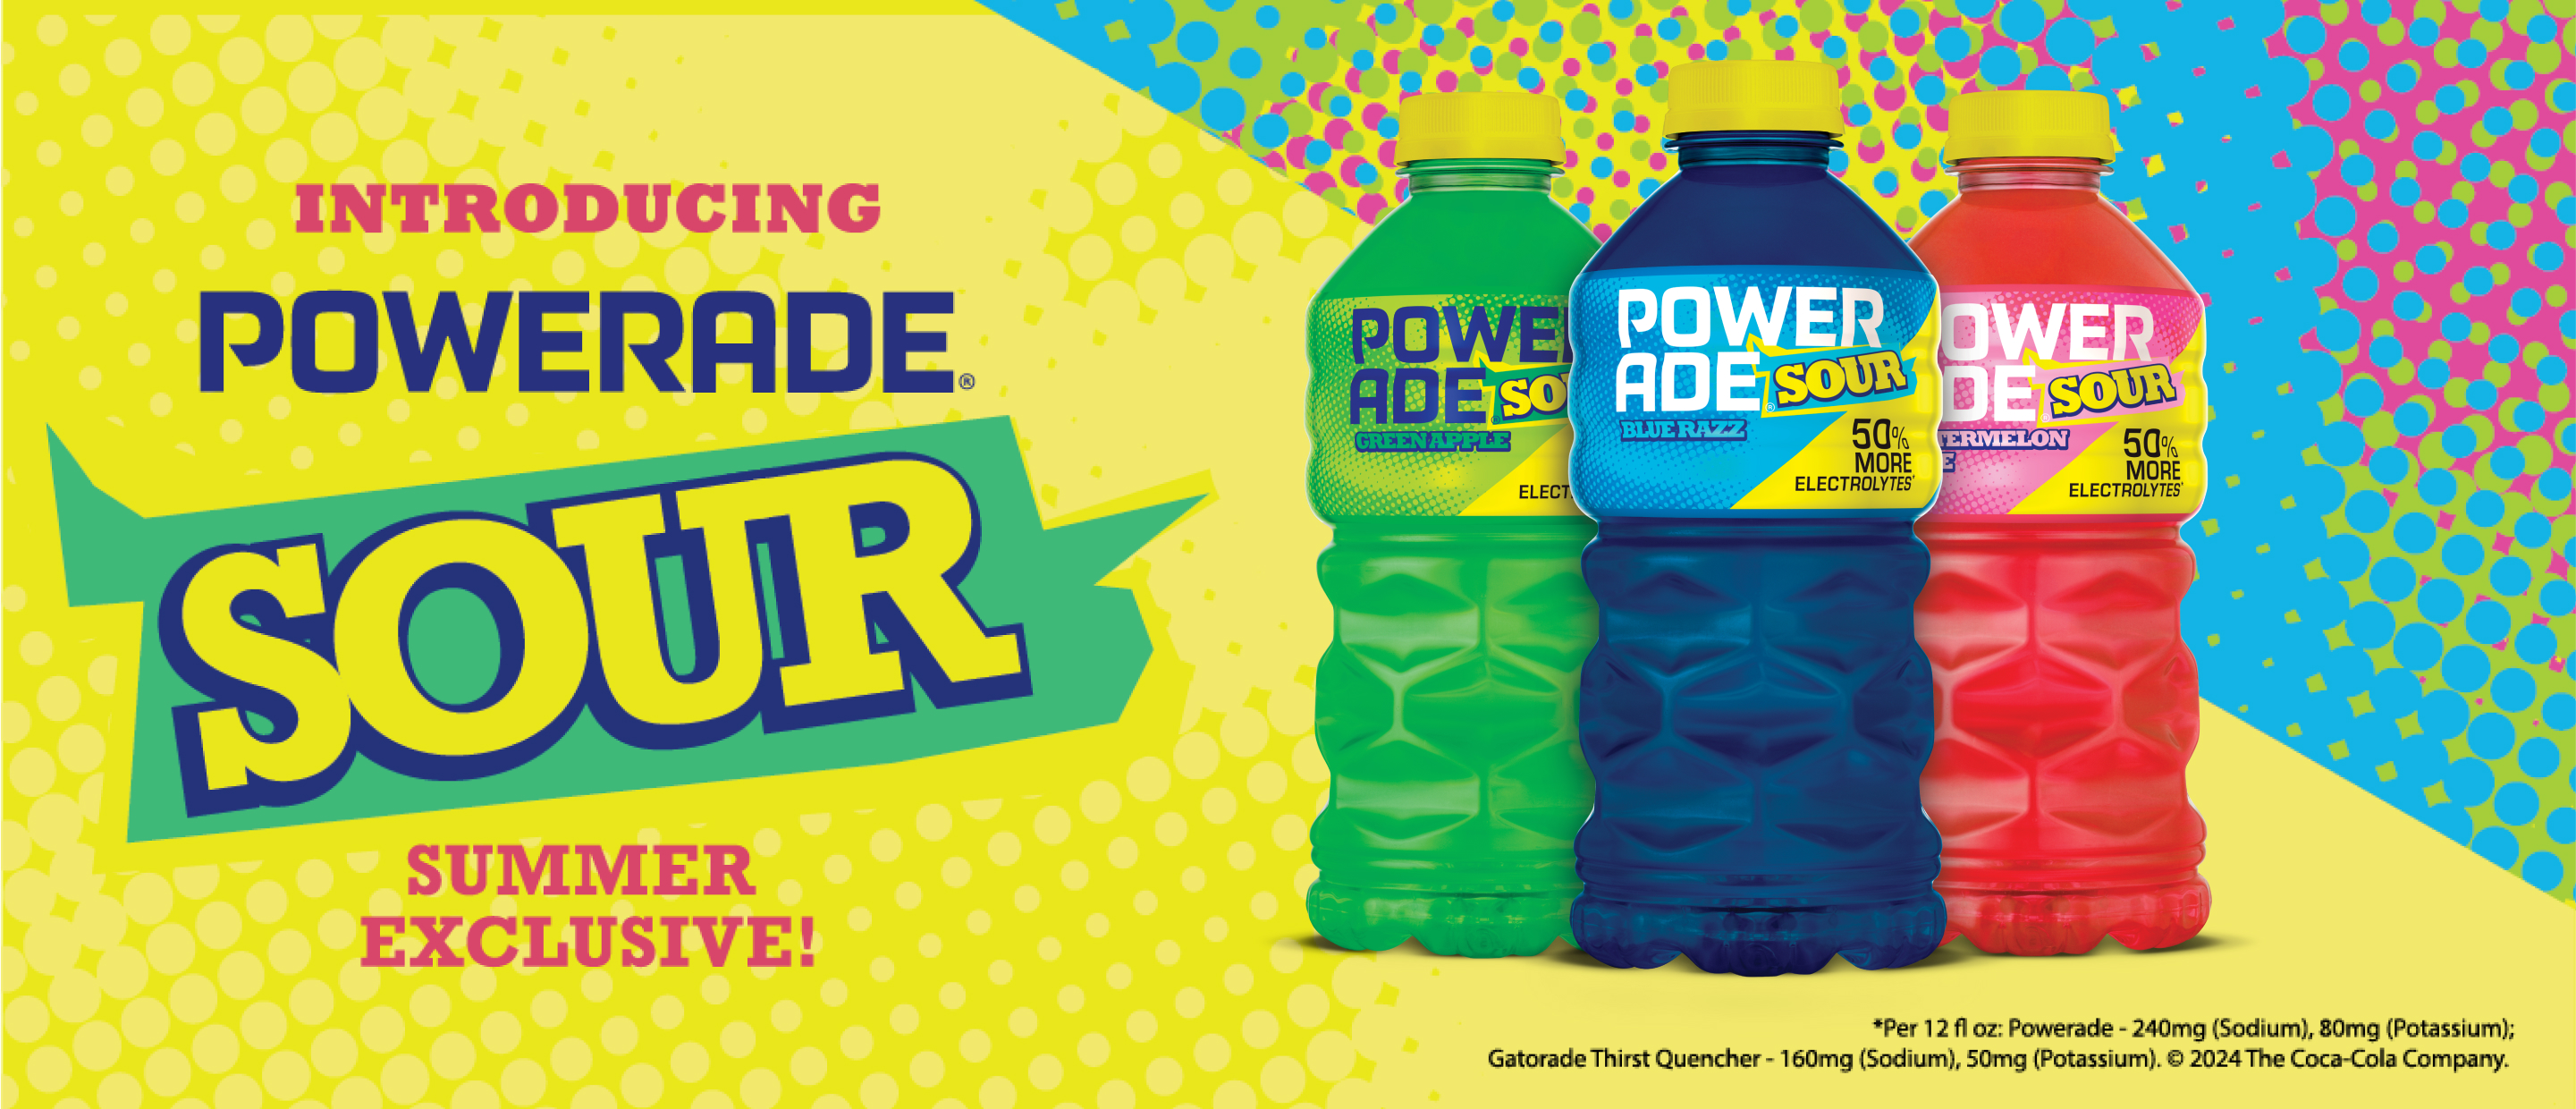 three bottles of powerade sours against a yellow background